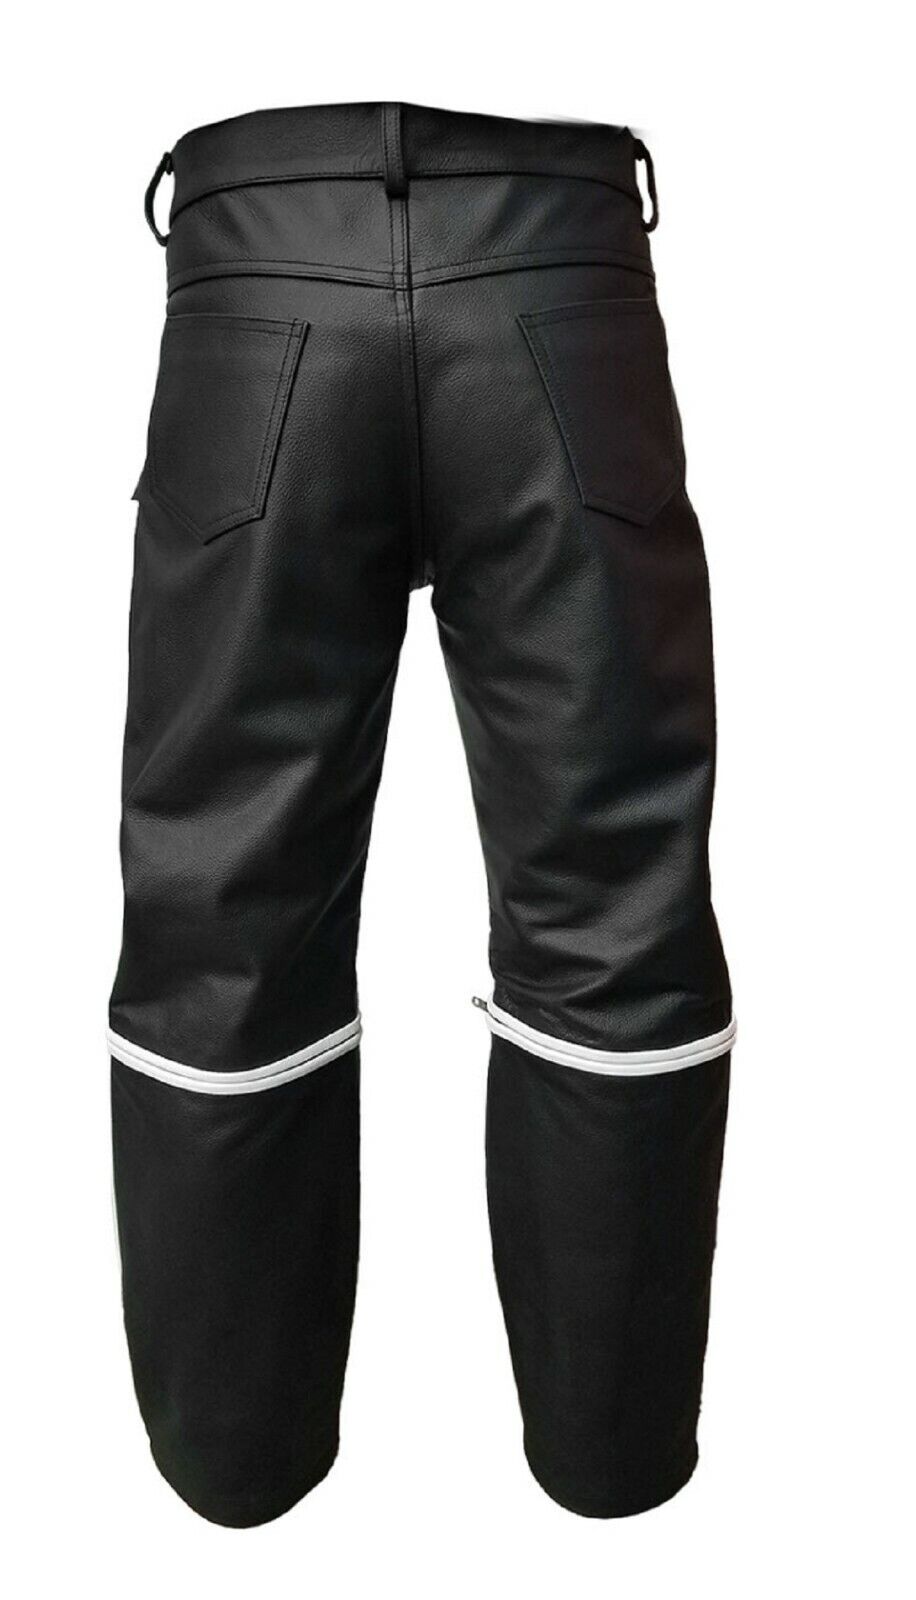 MENS BIKERS STYLE JEANS BLACK AND WHITE LEATHER PANTS (FREE P&P IN UK)